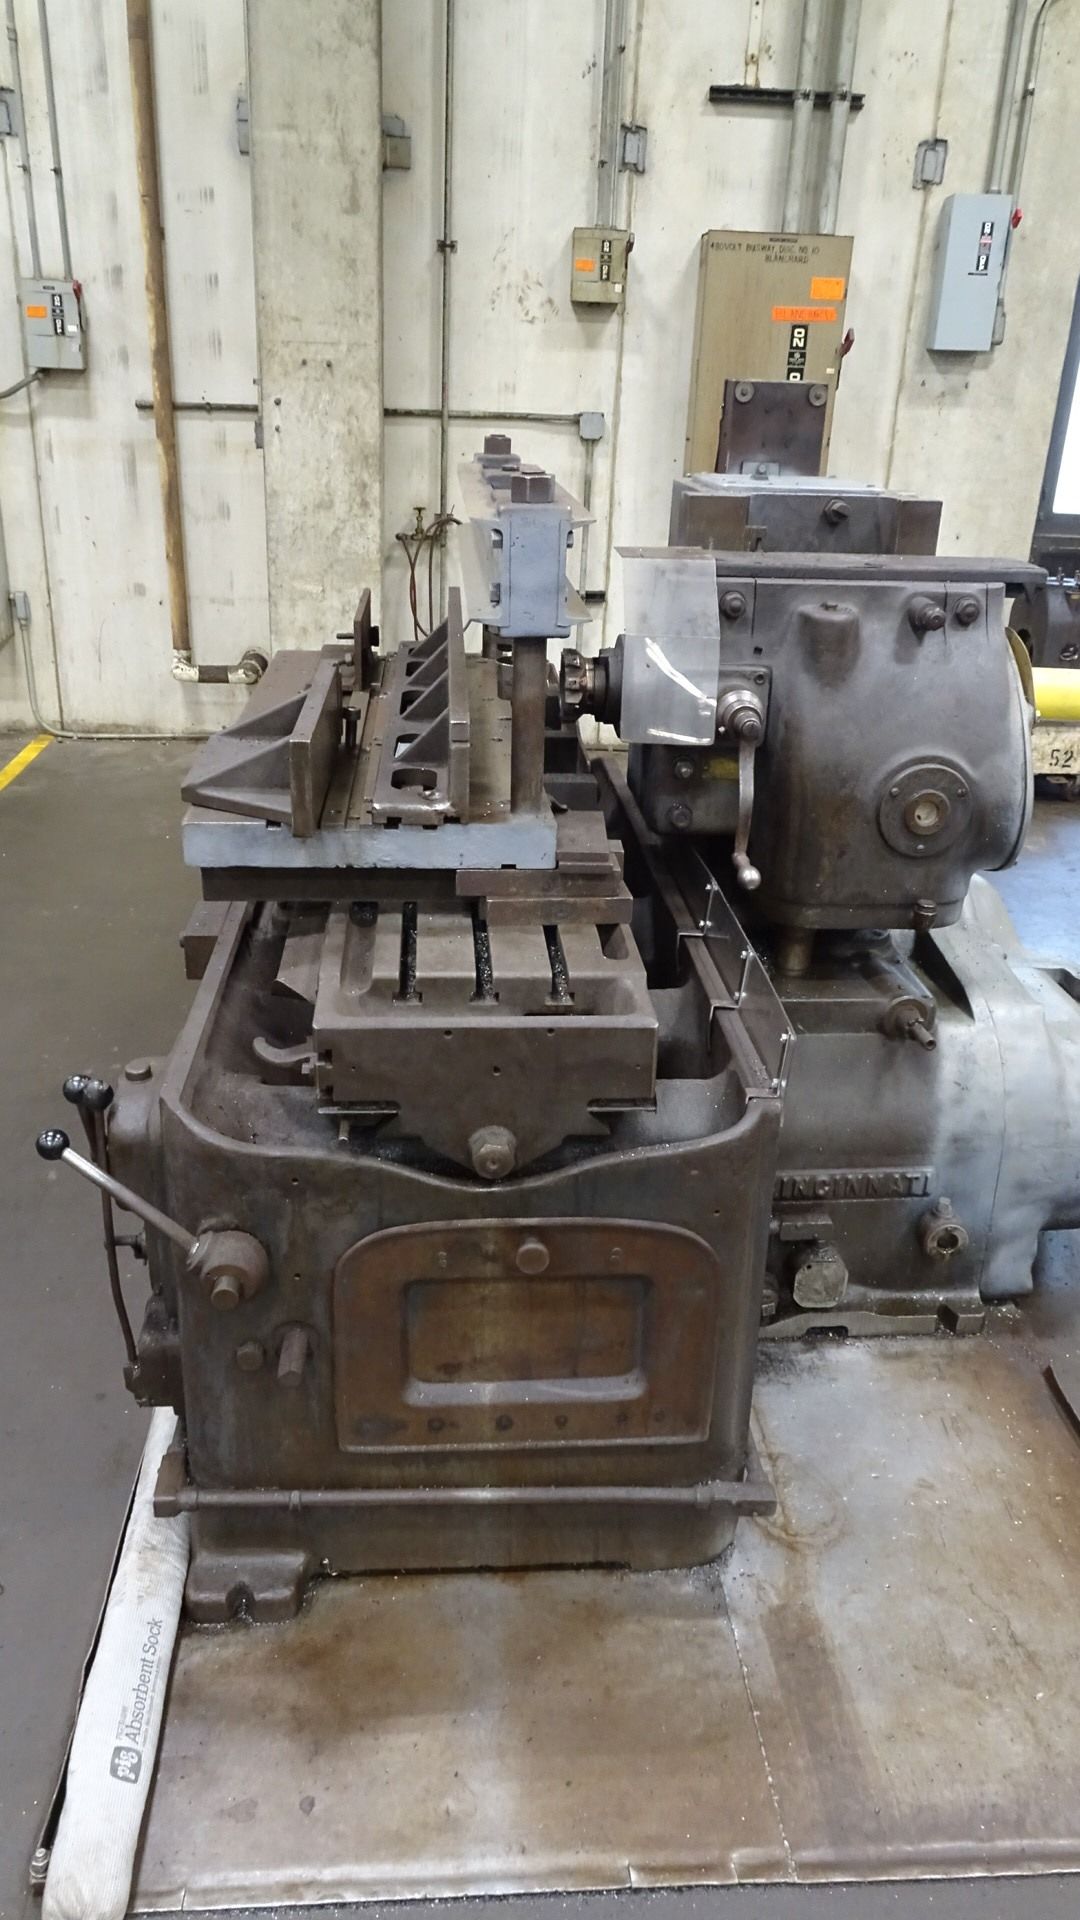 Cincinnati Model 34-48 ''Hydro-Matic'' Horizontal Production Milling Machine with Hydraulic Table - Image 2 of 4